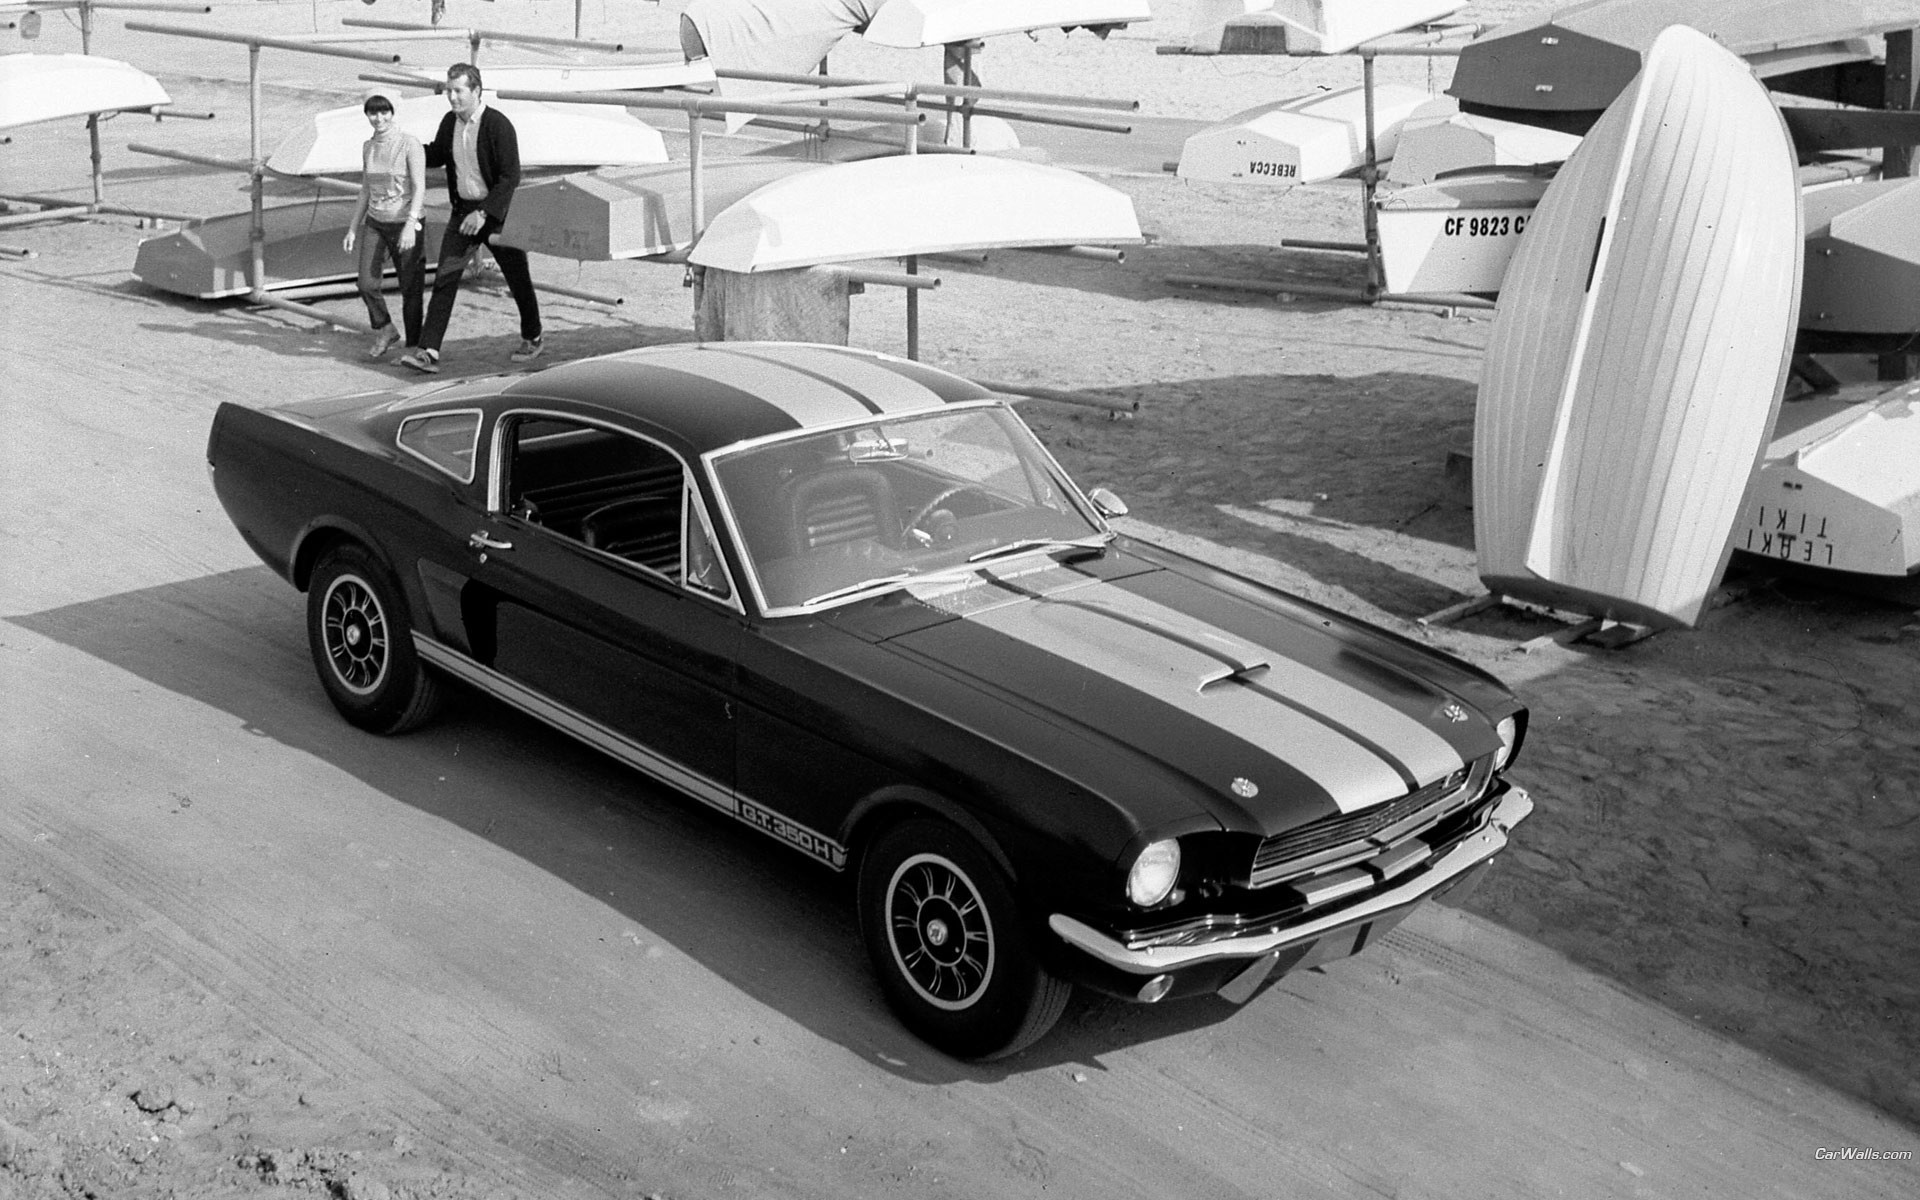 Wallpapers monochrome car Ford Mustang Shelby on the desktop